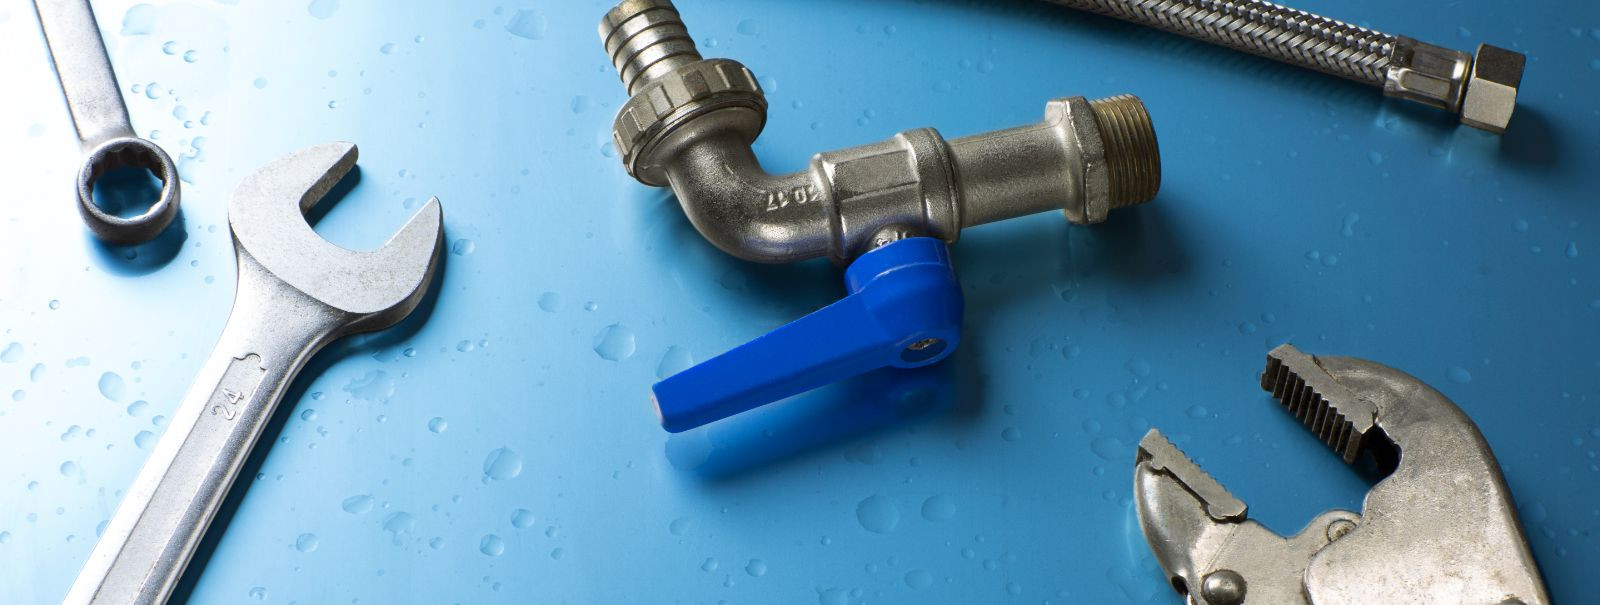 Plumbing is a critical component of any residential or commercial building. It ensures the delivery of clean water and the safe disposal of waste, which are ess